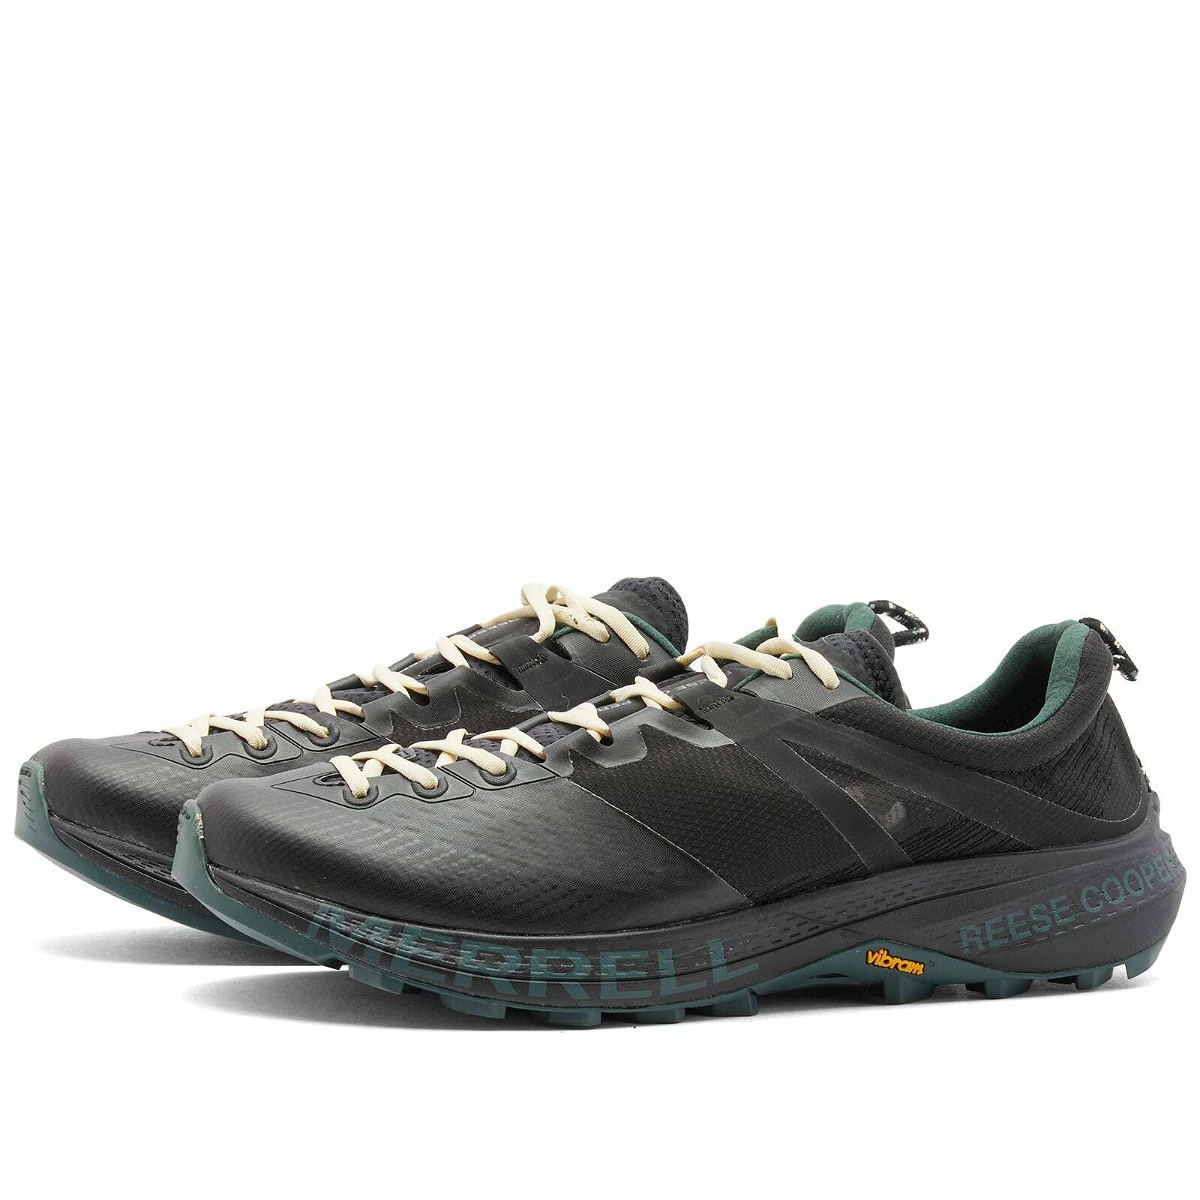 Photo: Merrell x Reese Cooper MTL MQM Sneakers in Pirate Black